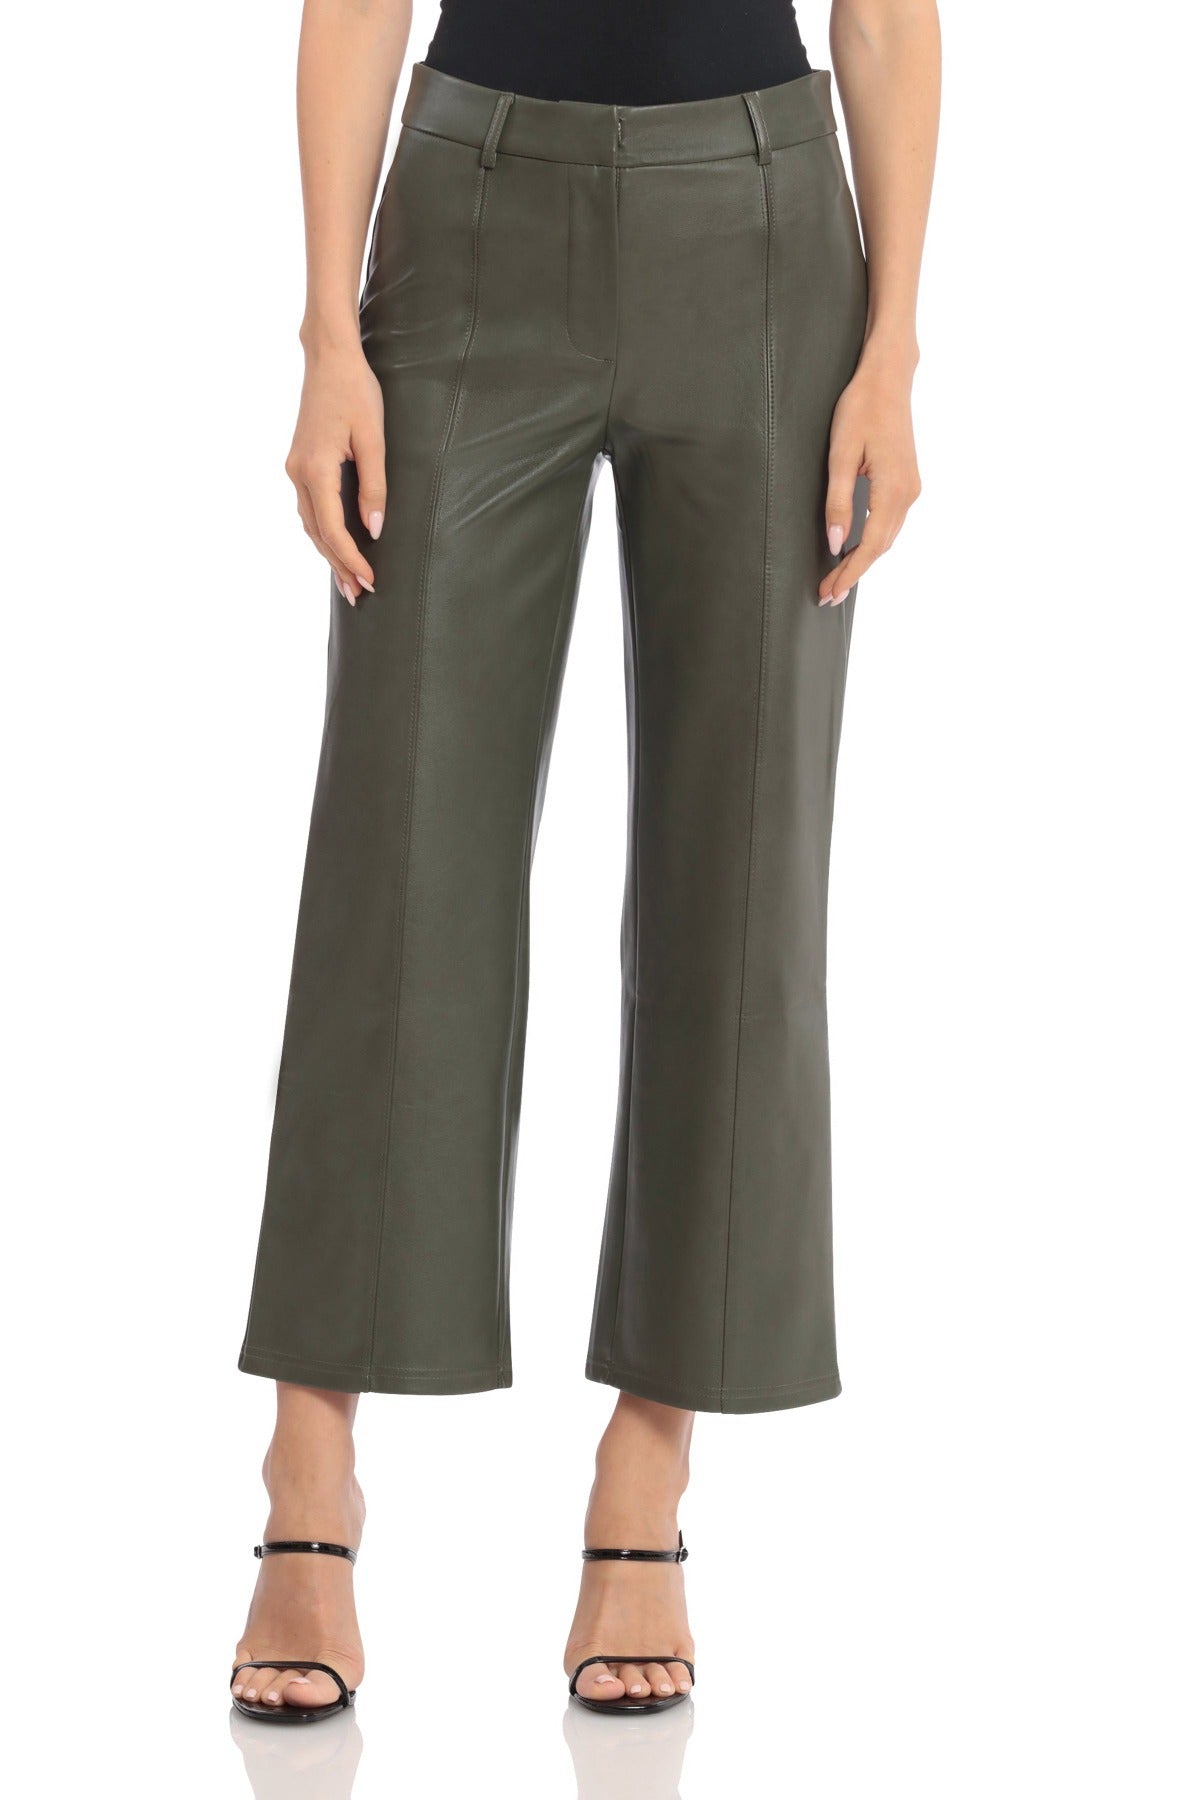 Faux Leather Seam-Front Straight Leg Trouser Pants Olive Green - Figure Flattering Work Appropriate Bottoms for Women Designer Fashion Pant